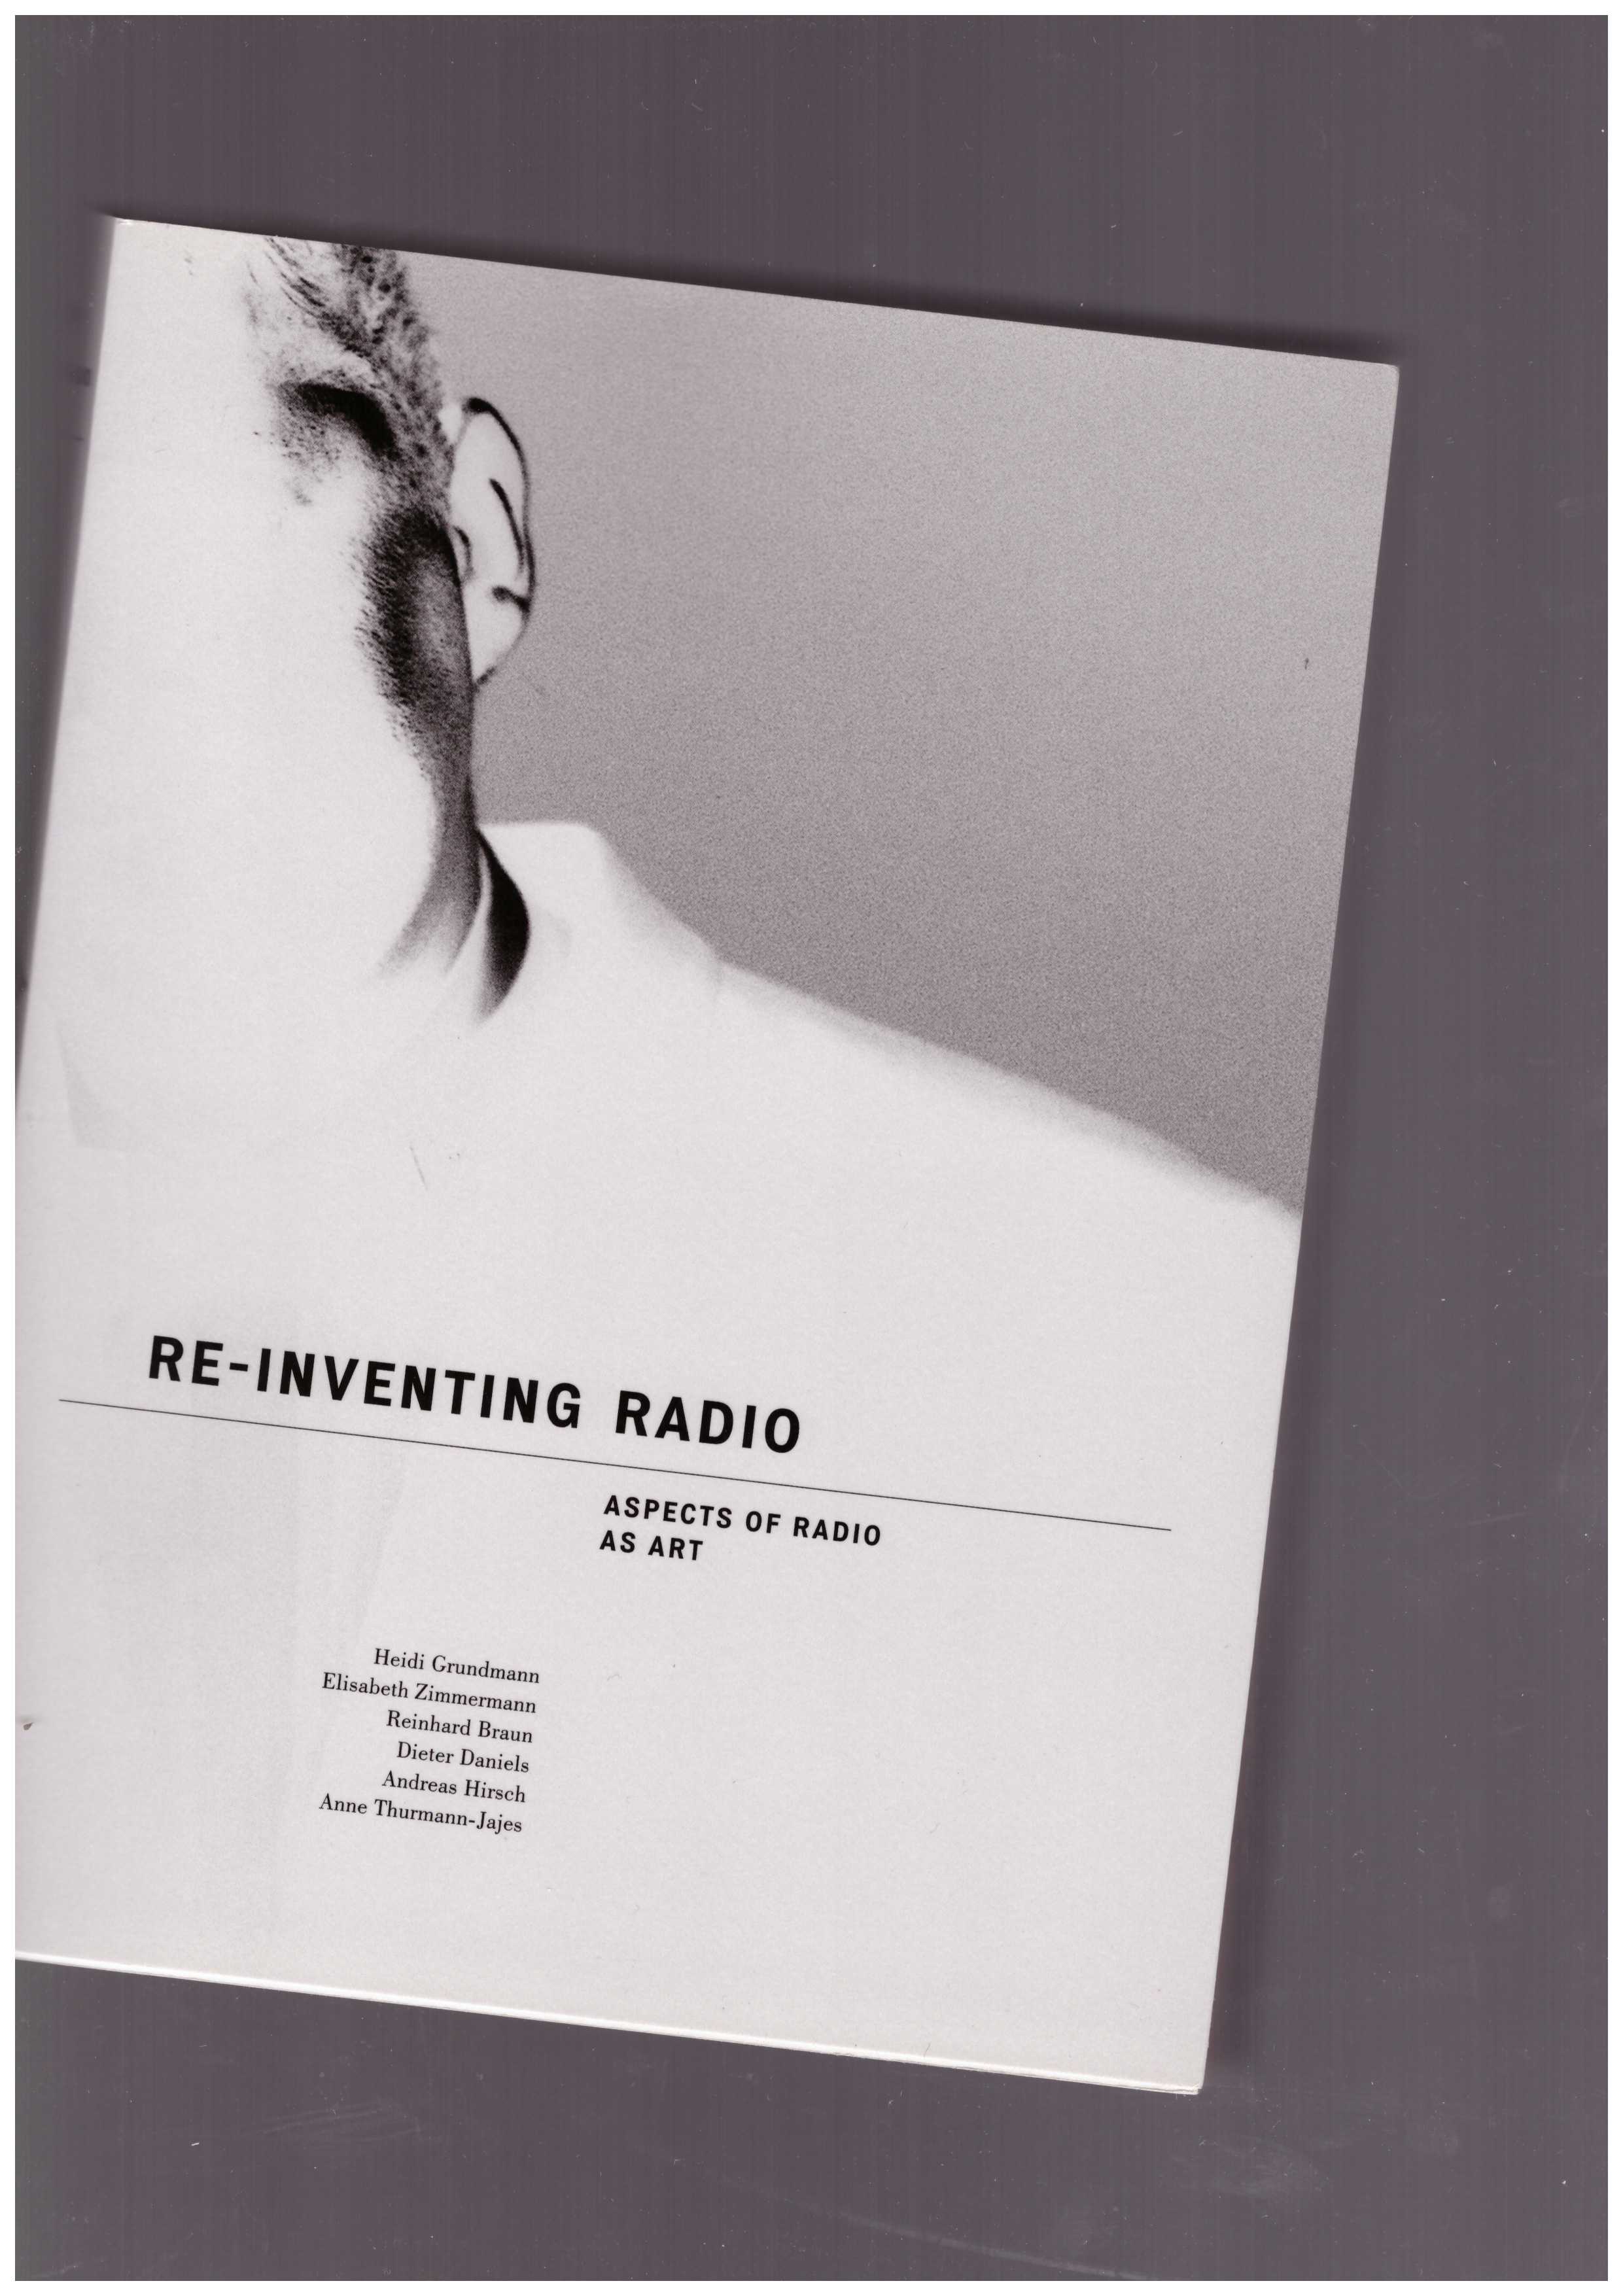 VARIOUS - Re-Inventing Radio. Aspects of Radio as Art